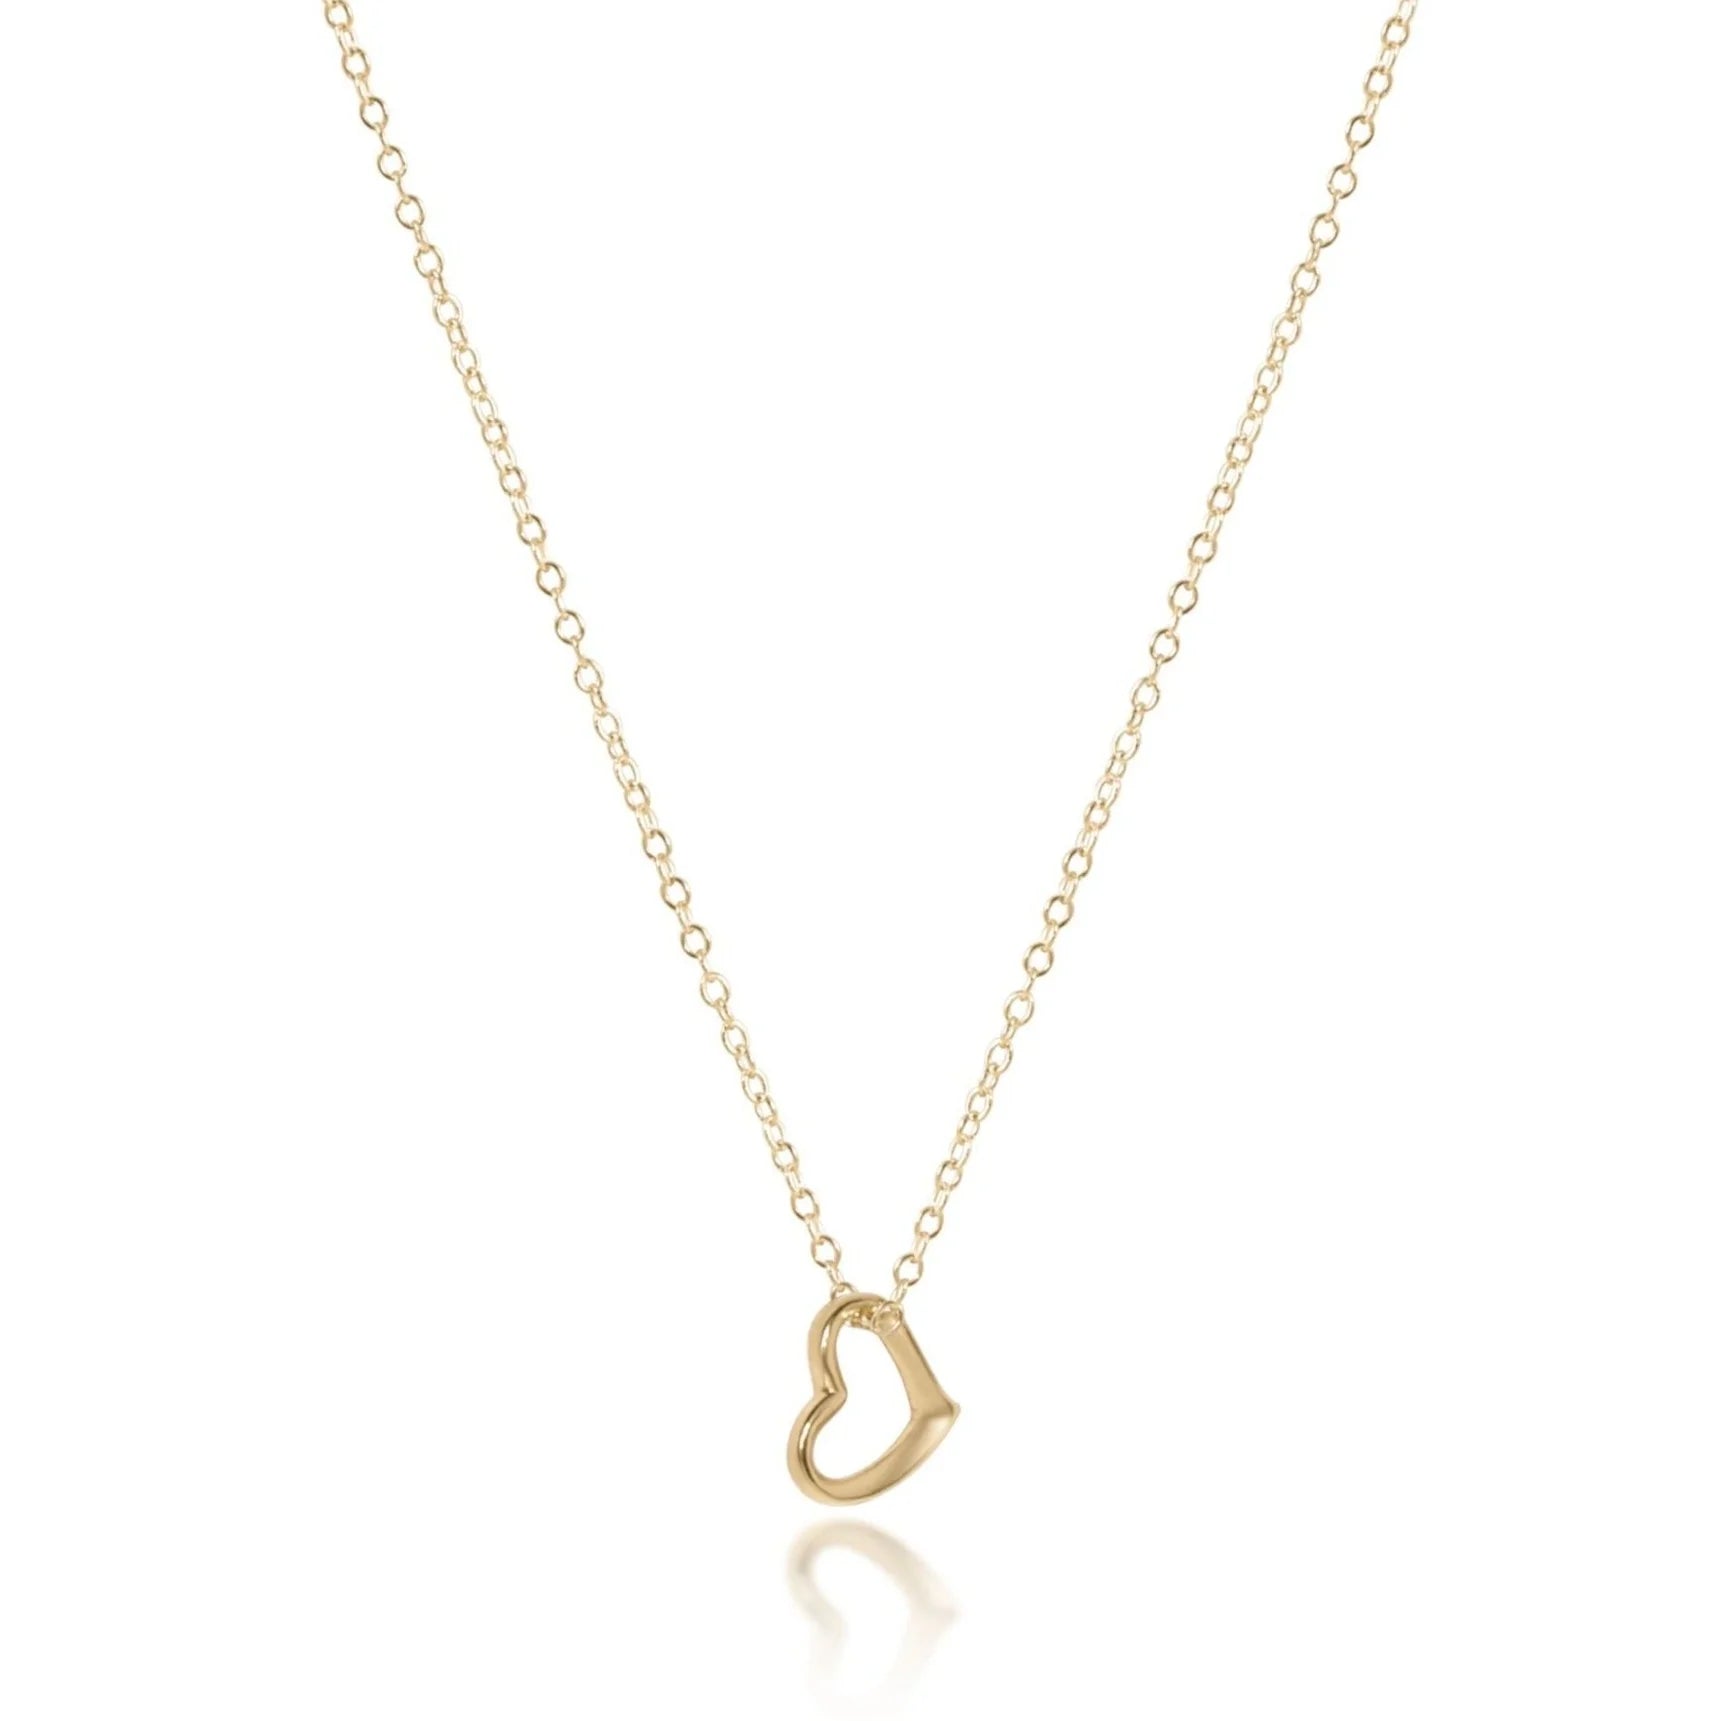 16" NECKLACE GOLD - LOVE SMALL GOLD CHARM